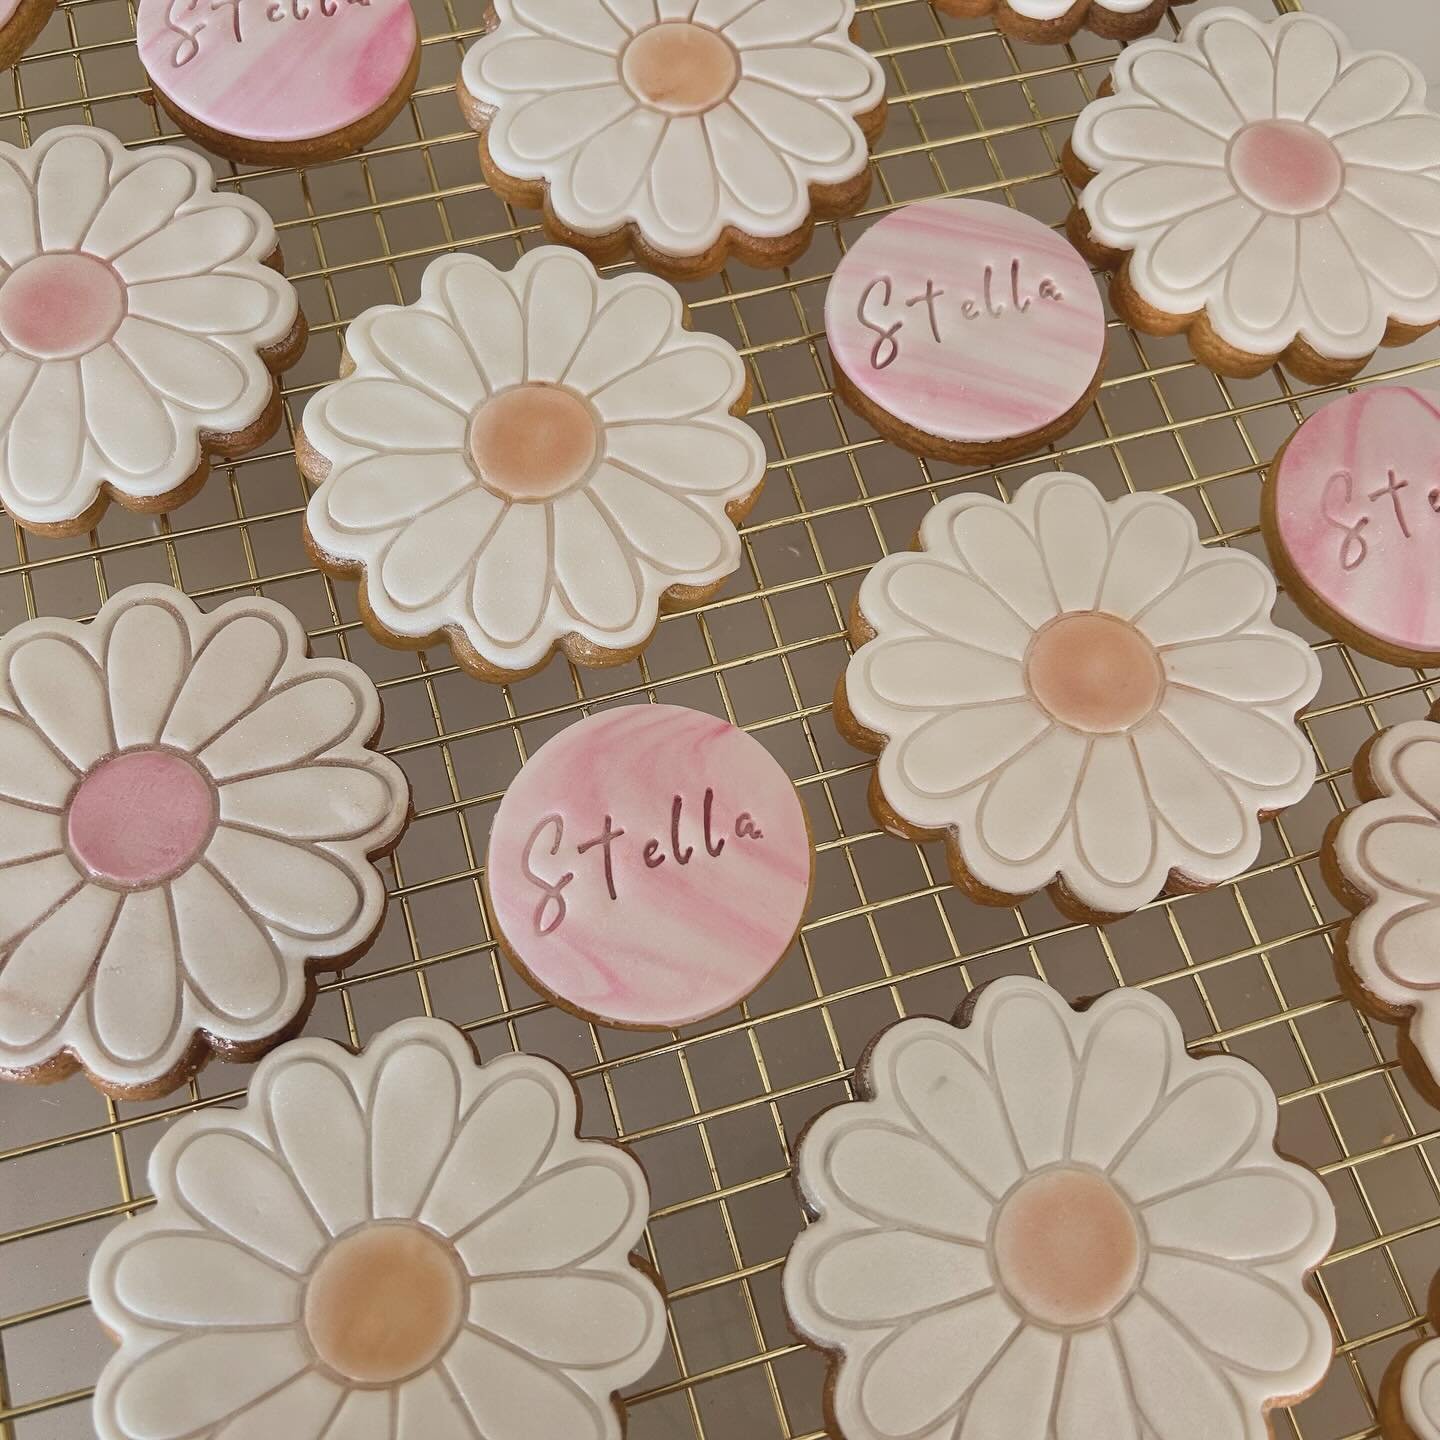 Cute Daisy Cookies for Stella&rsquo;s 2nd Birthday! We loved celebrating with you Stella 🩷 @rebeccalenzo @littleland_perth #perthcookies #sugarcookies #sugarcookiesperth #perth #perthbaking #acdn #acdnmember